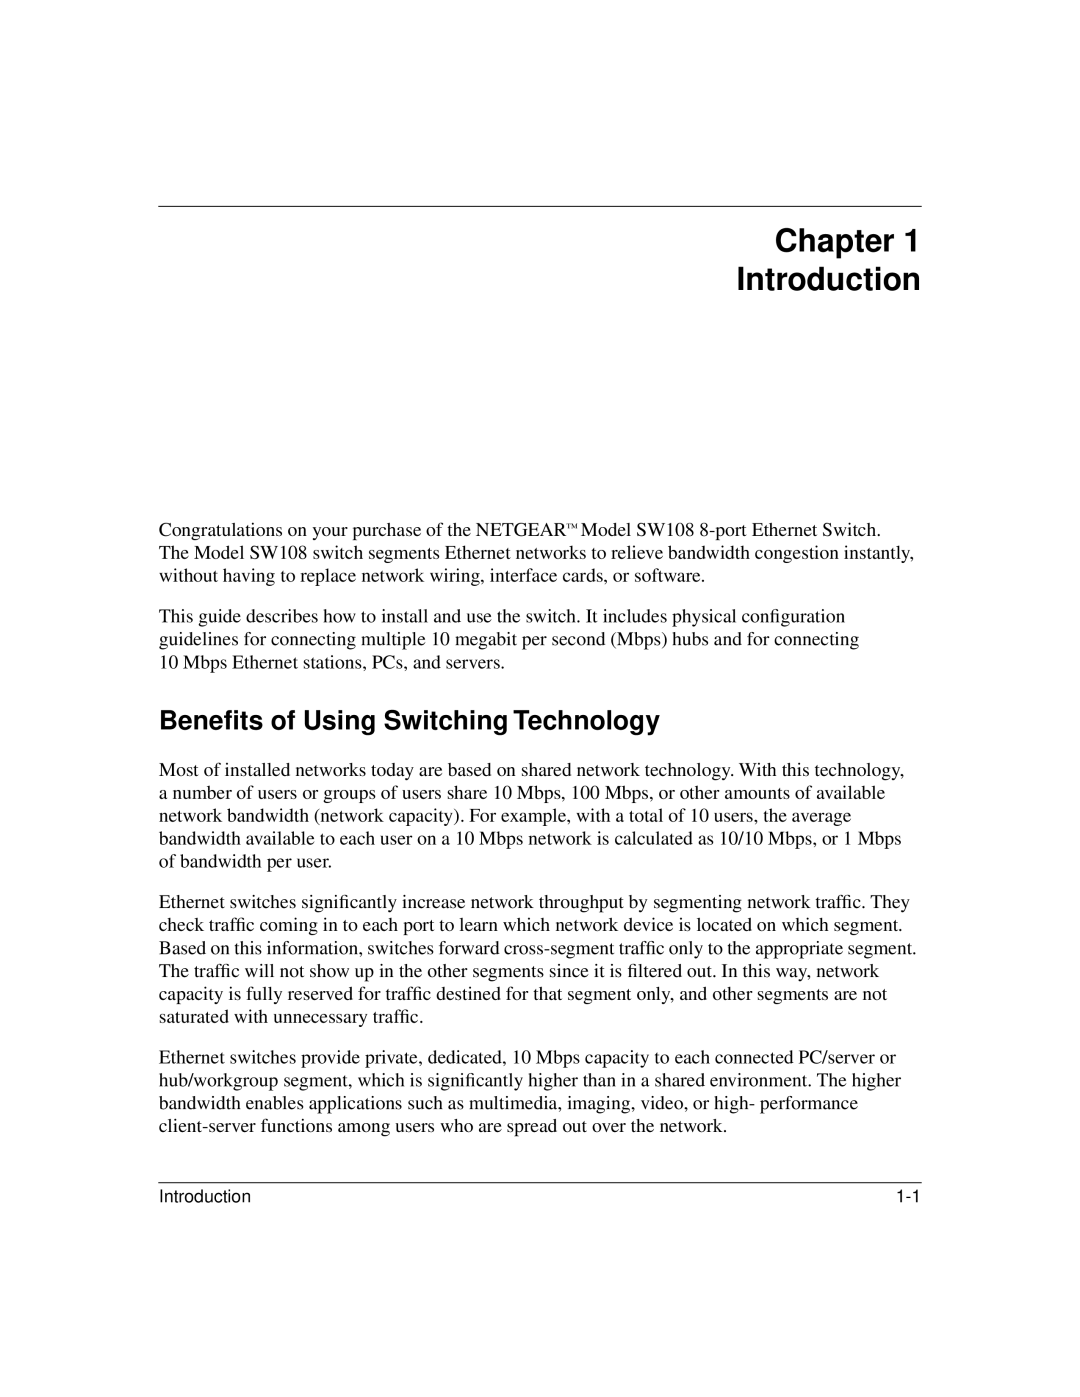 NETGEAR SW108 manual Chapter Introduction, Beneﬁts of Using Switching Technology 